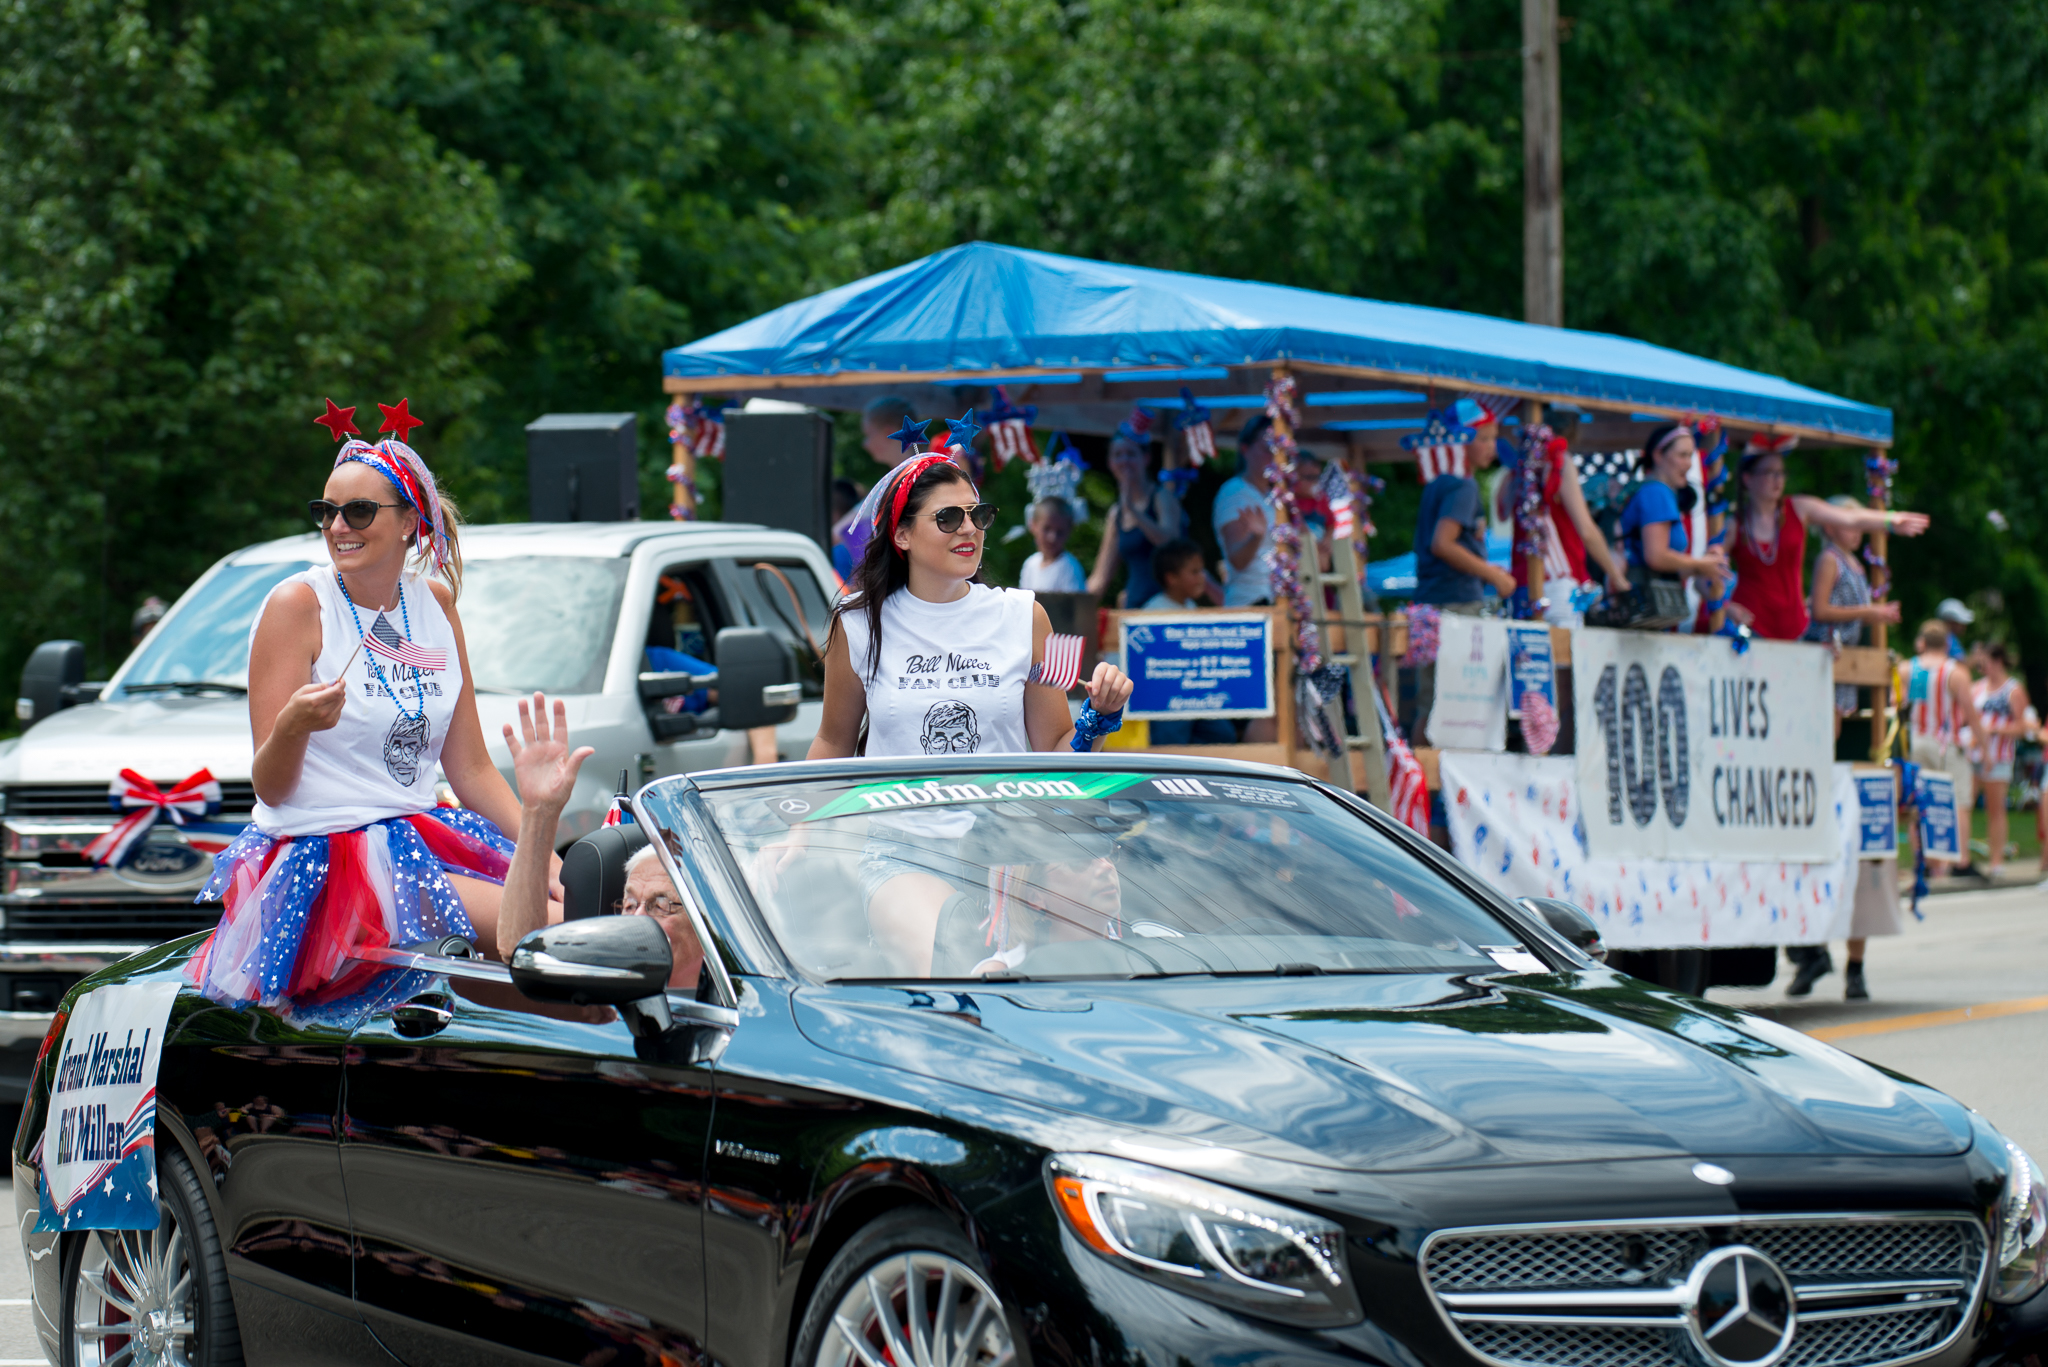 Ft. Mitchell, Kentucky - 2018 4th of July Parade